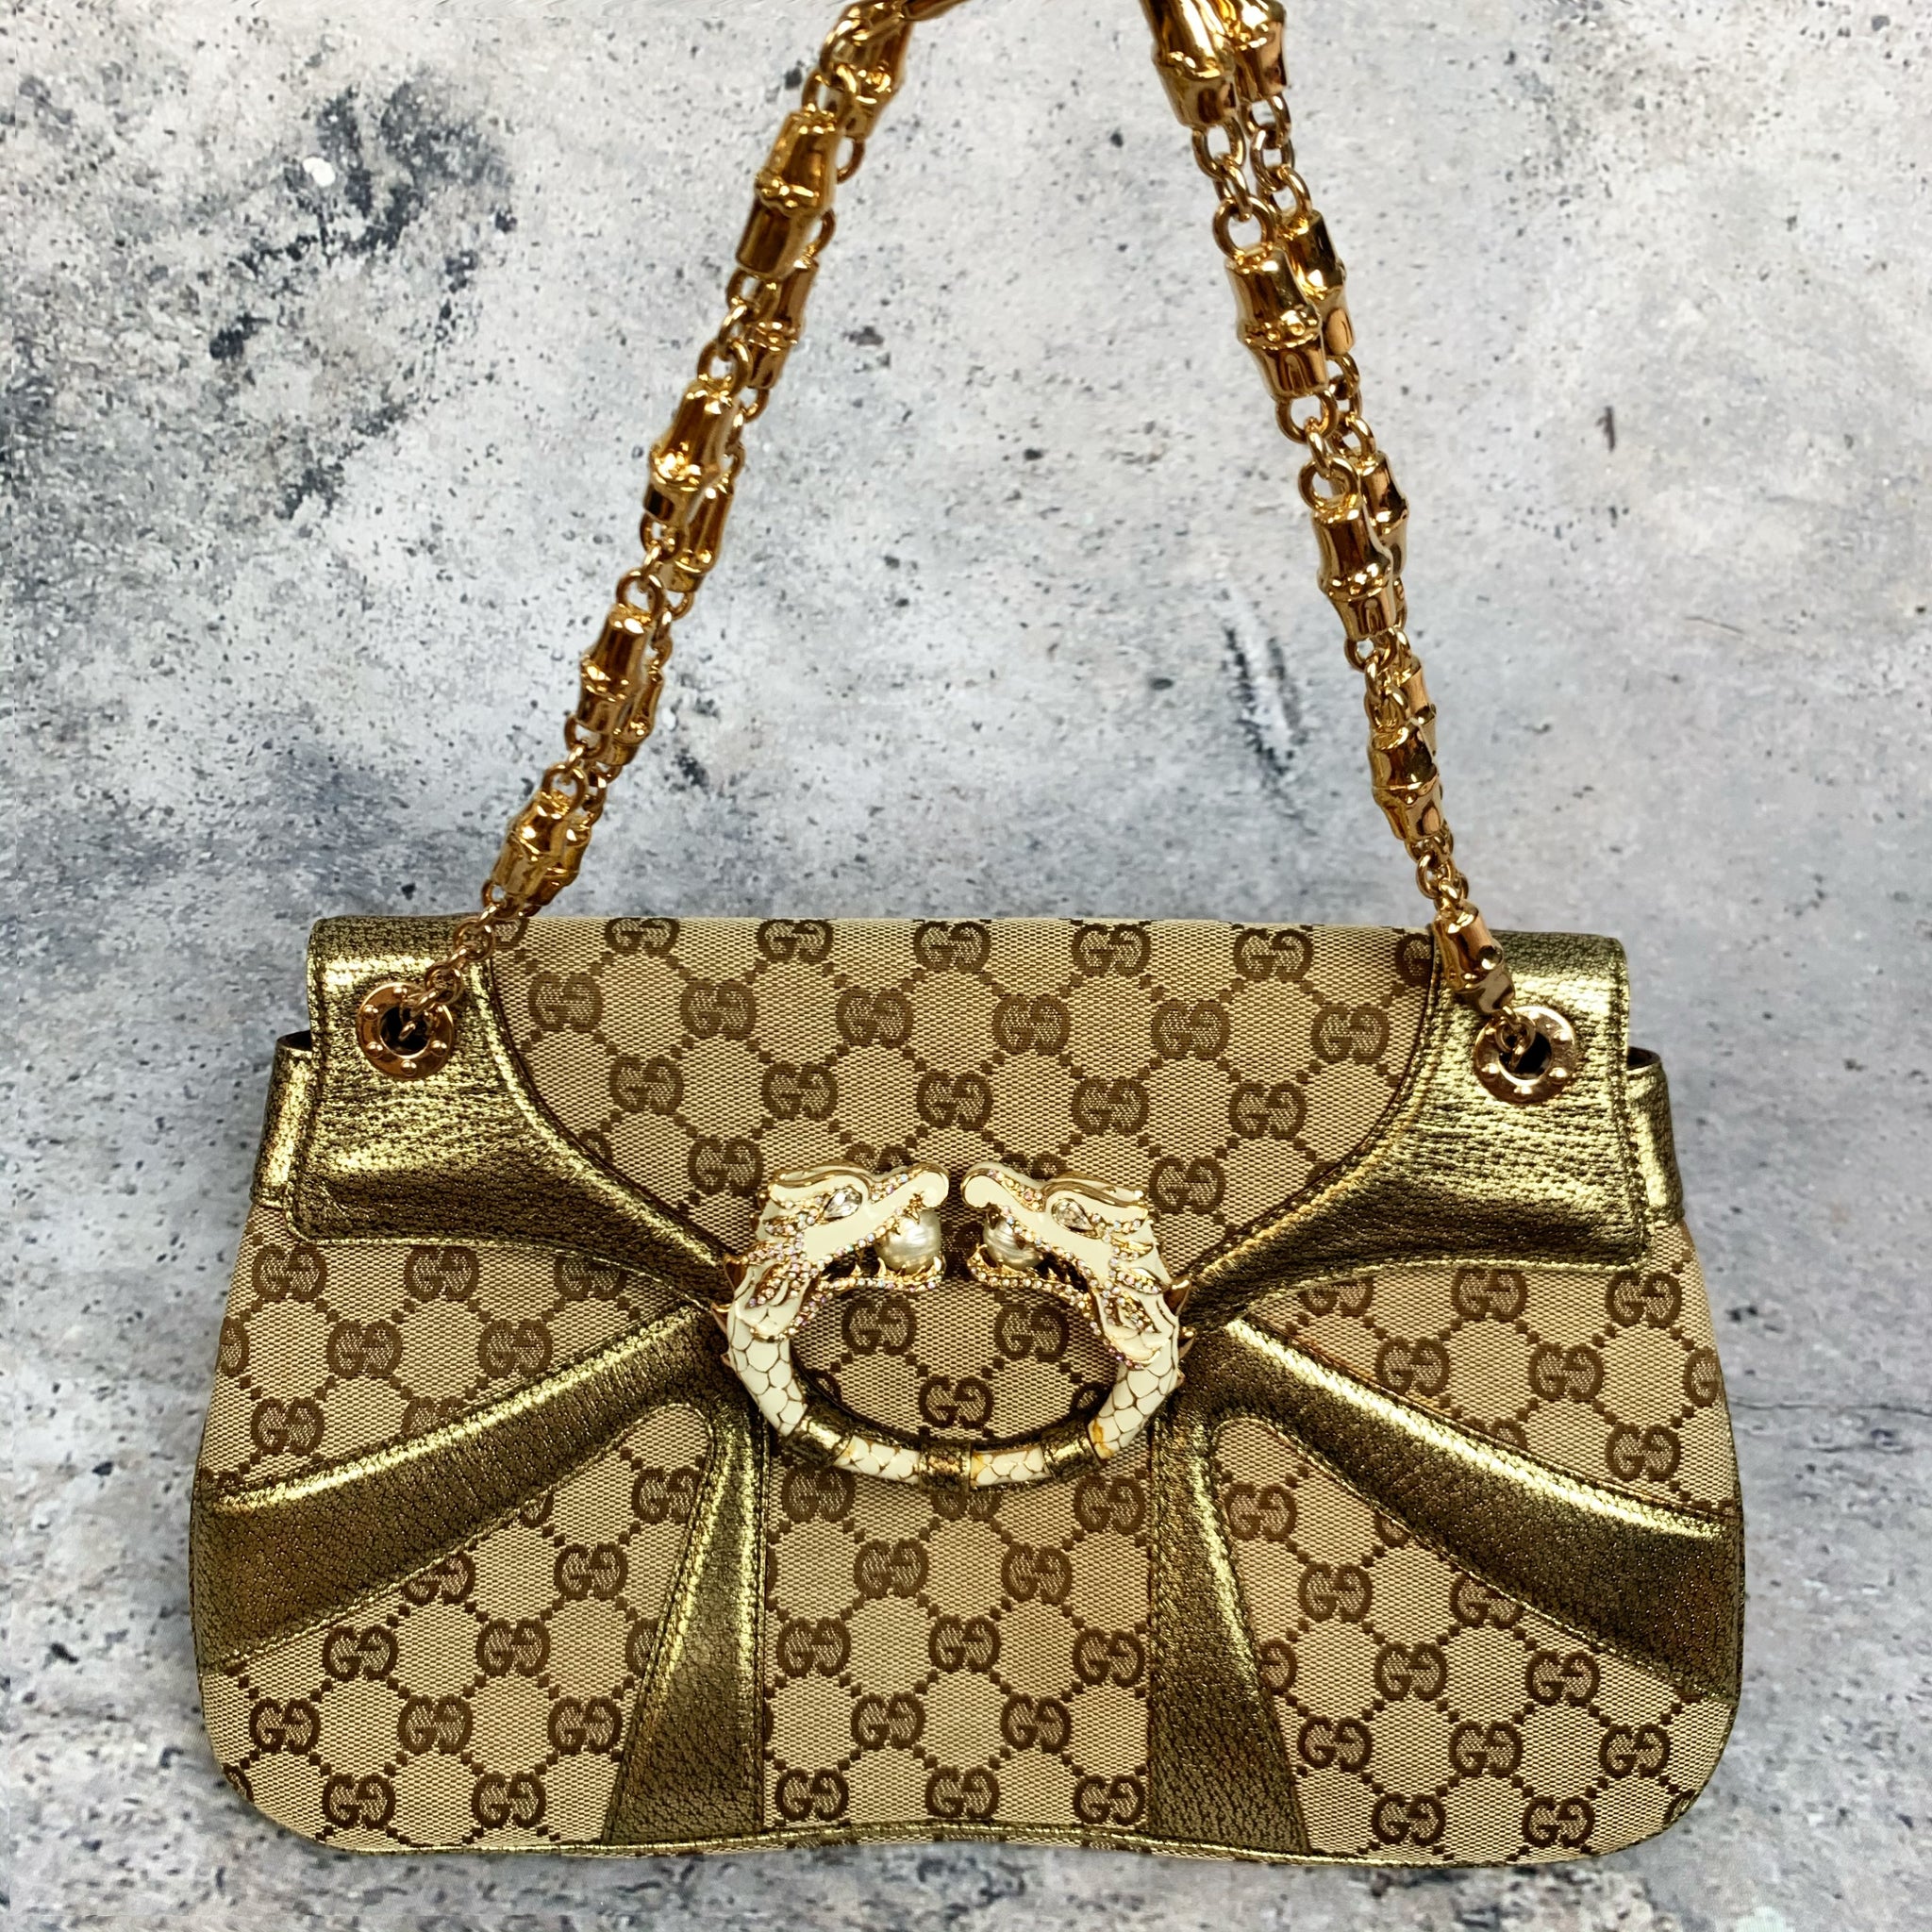 Gucci, Bags, Gucci Tan Pristine Bag With Link Strap Like Like New Without  The Price Tag